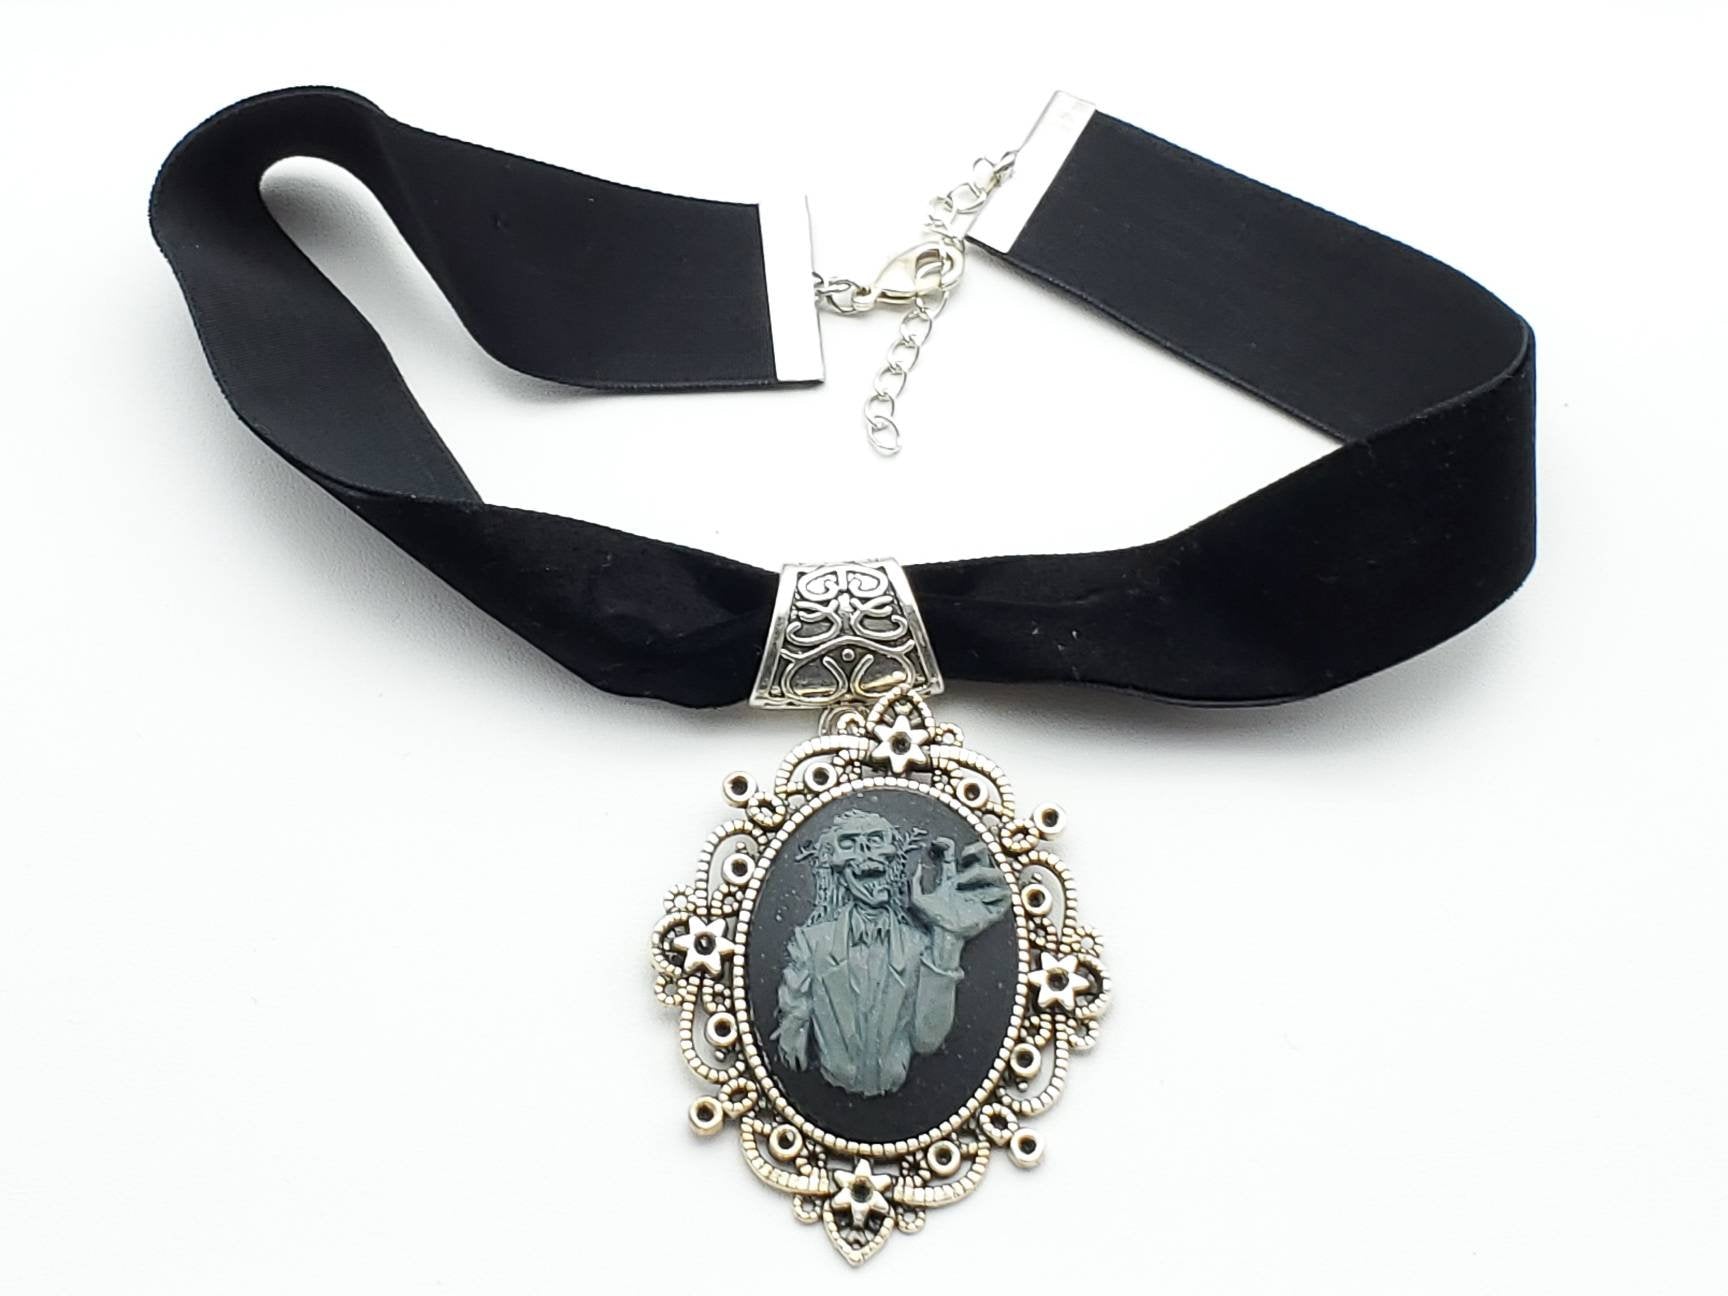 Choker with Zombie Cameo - The Caffeinated Raven